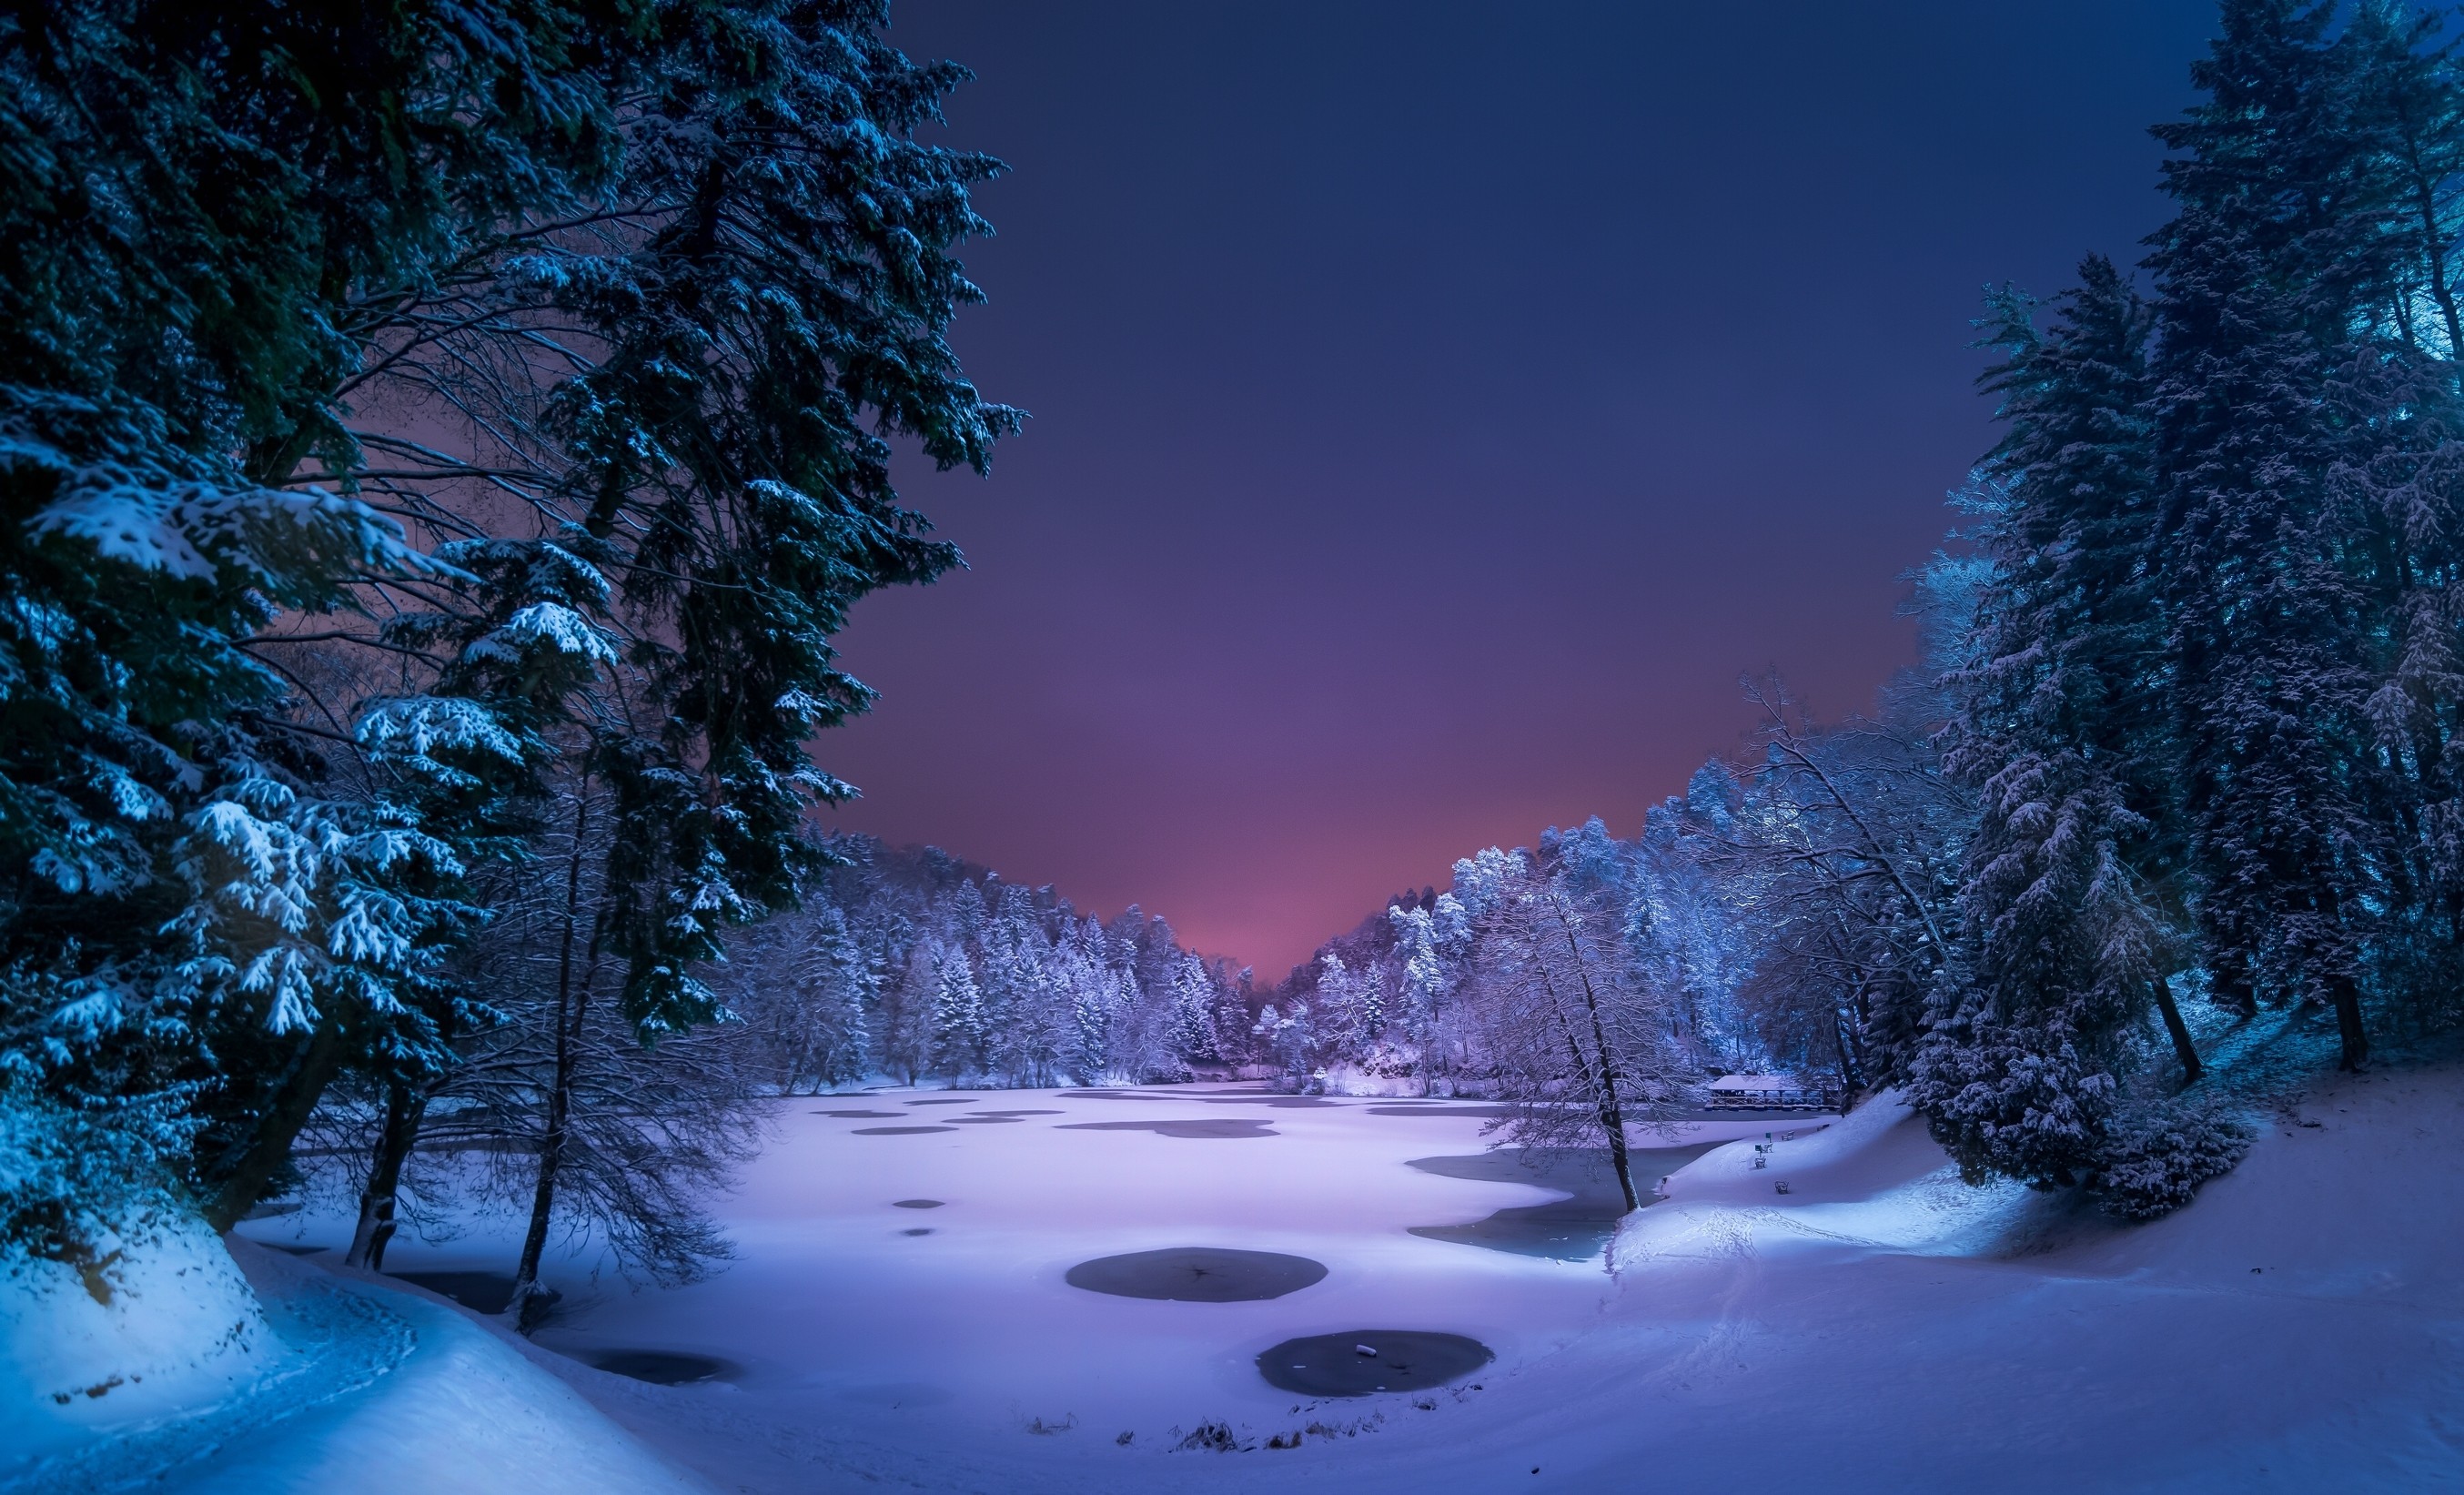 General 2708x1643 night landscape snow ice winter trees nature pond forest blue frozen lake lake path violet park